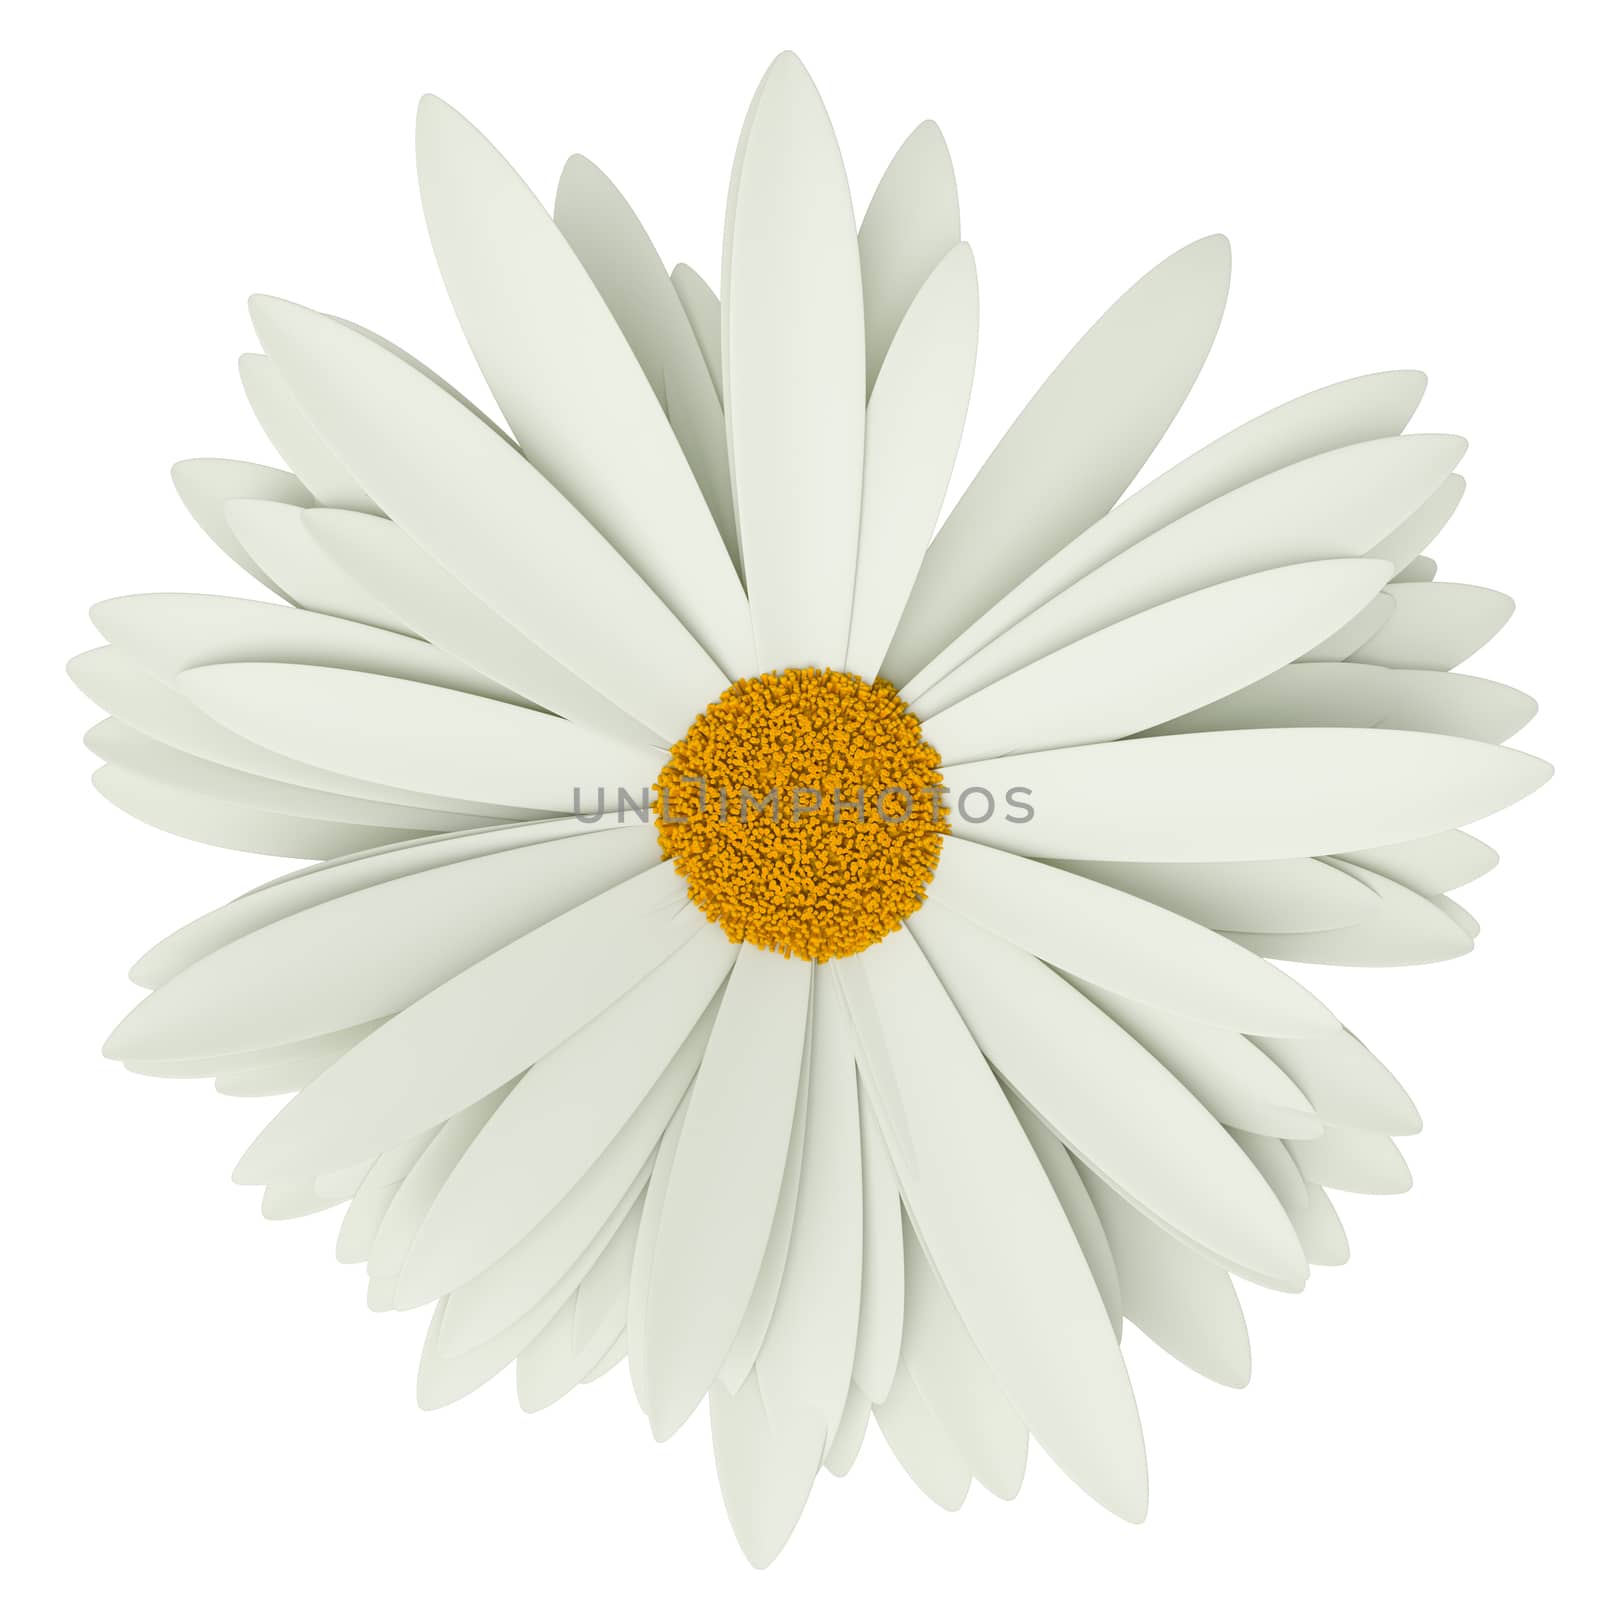 Chamomile flower, isolated on white background. Top view. Summer symbol for your design. 3D illustration